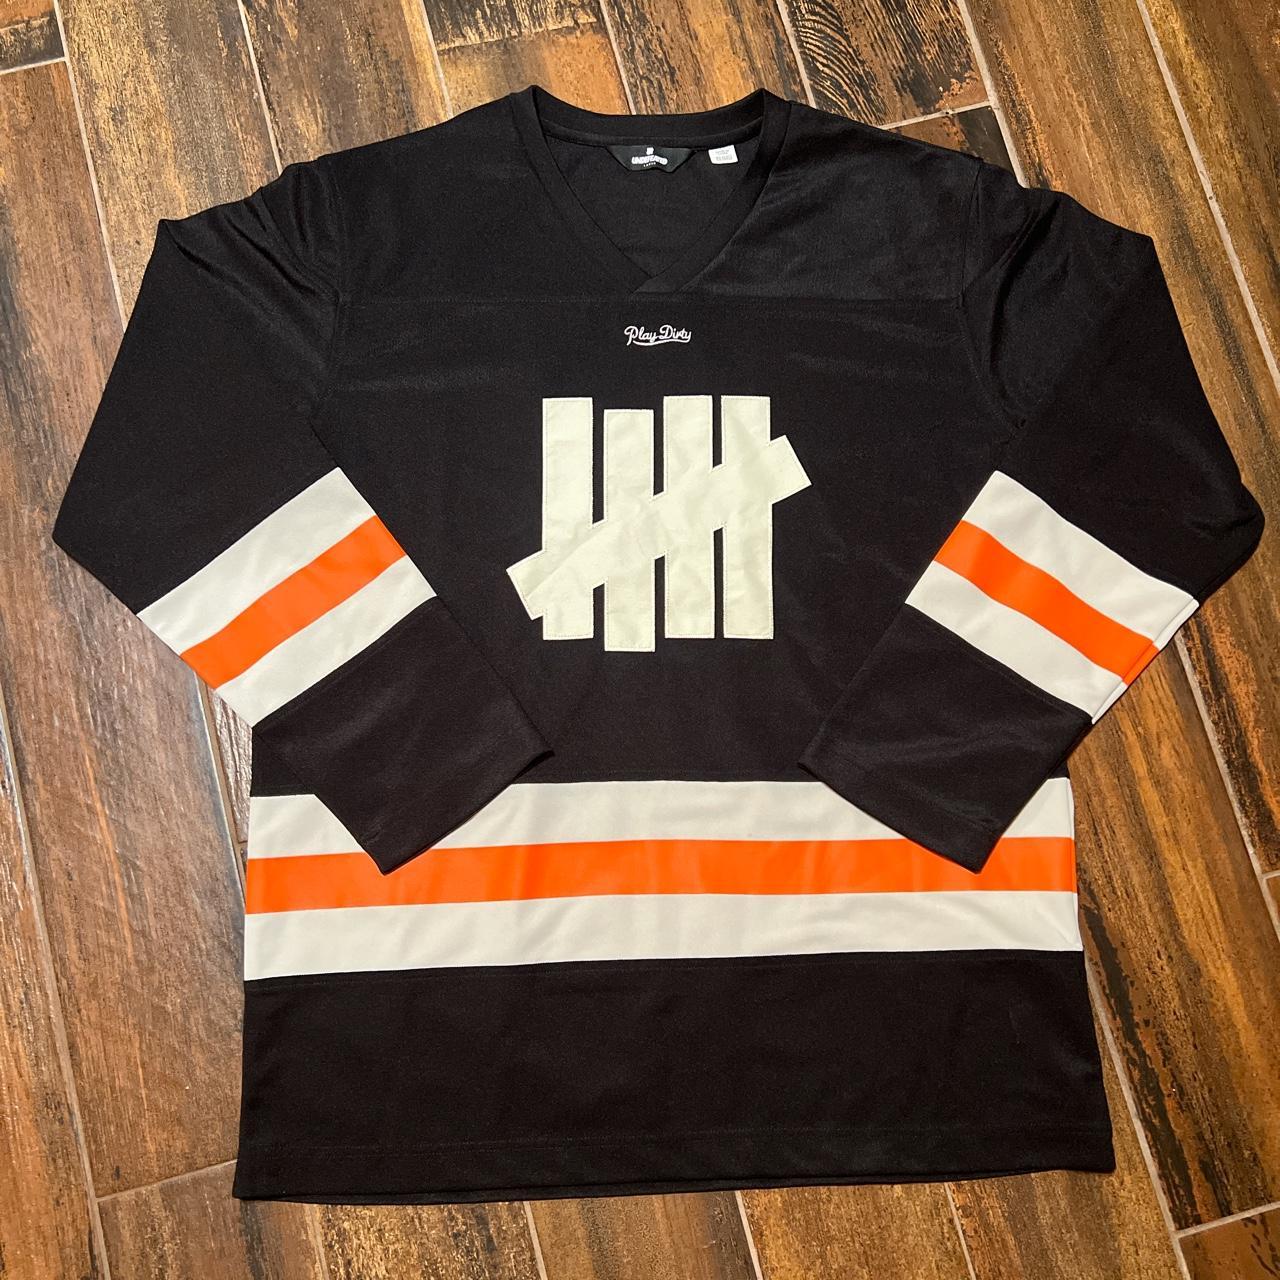 Undefeated Men's Black and White Top